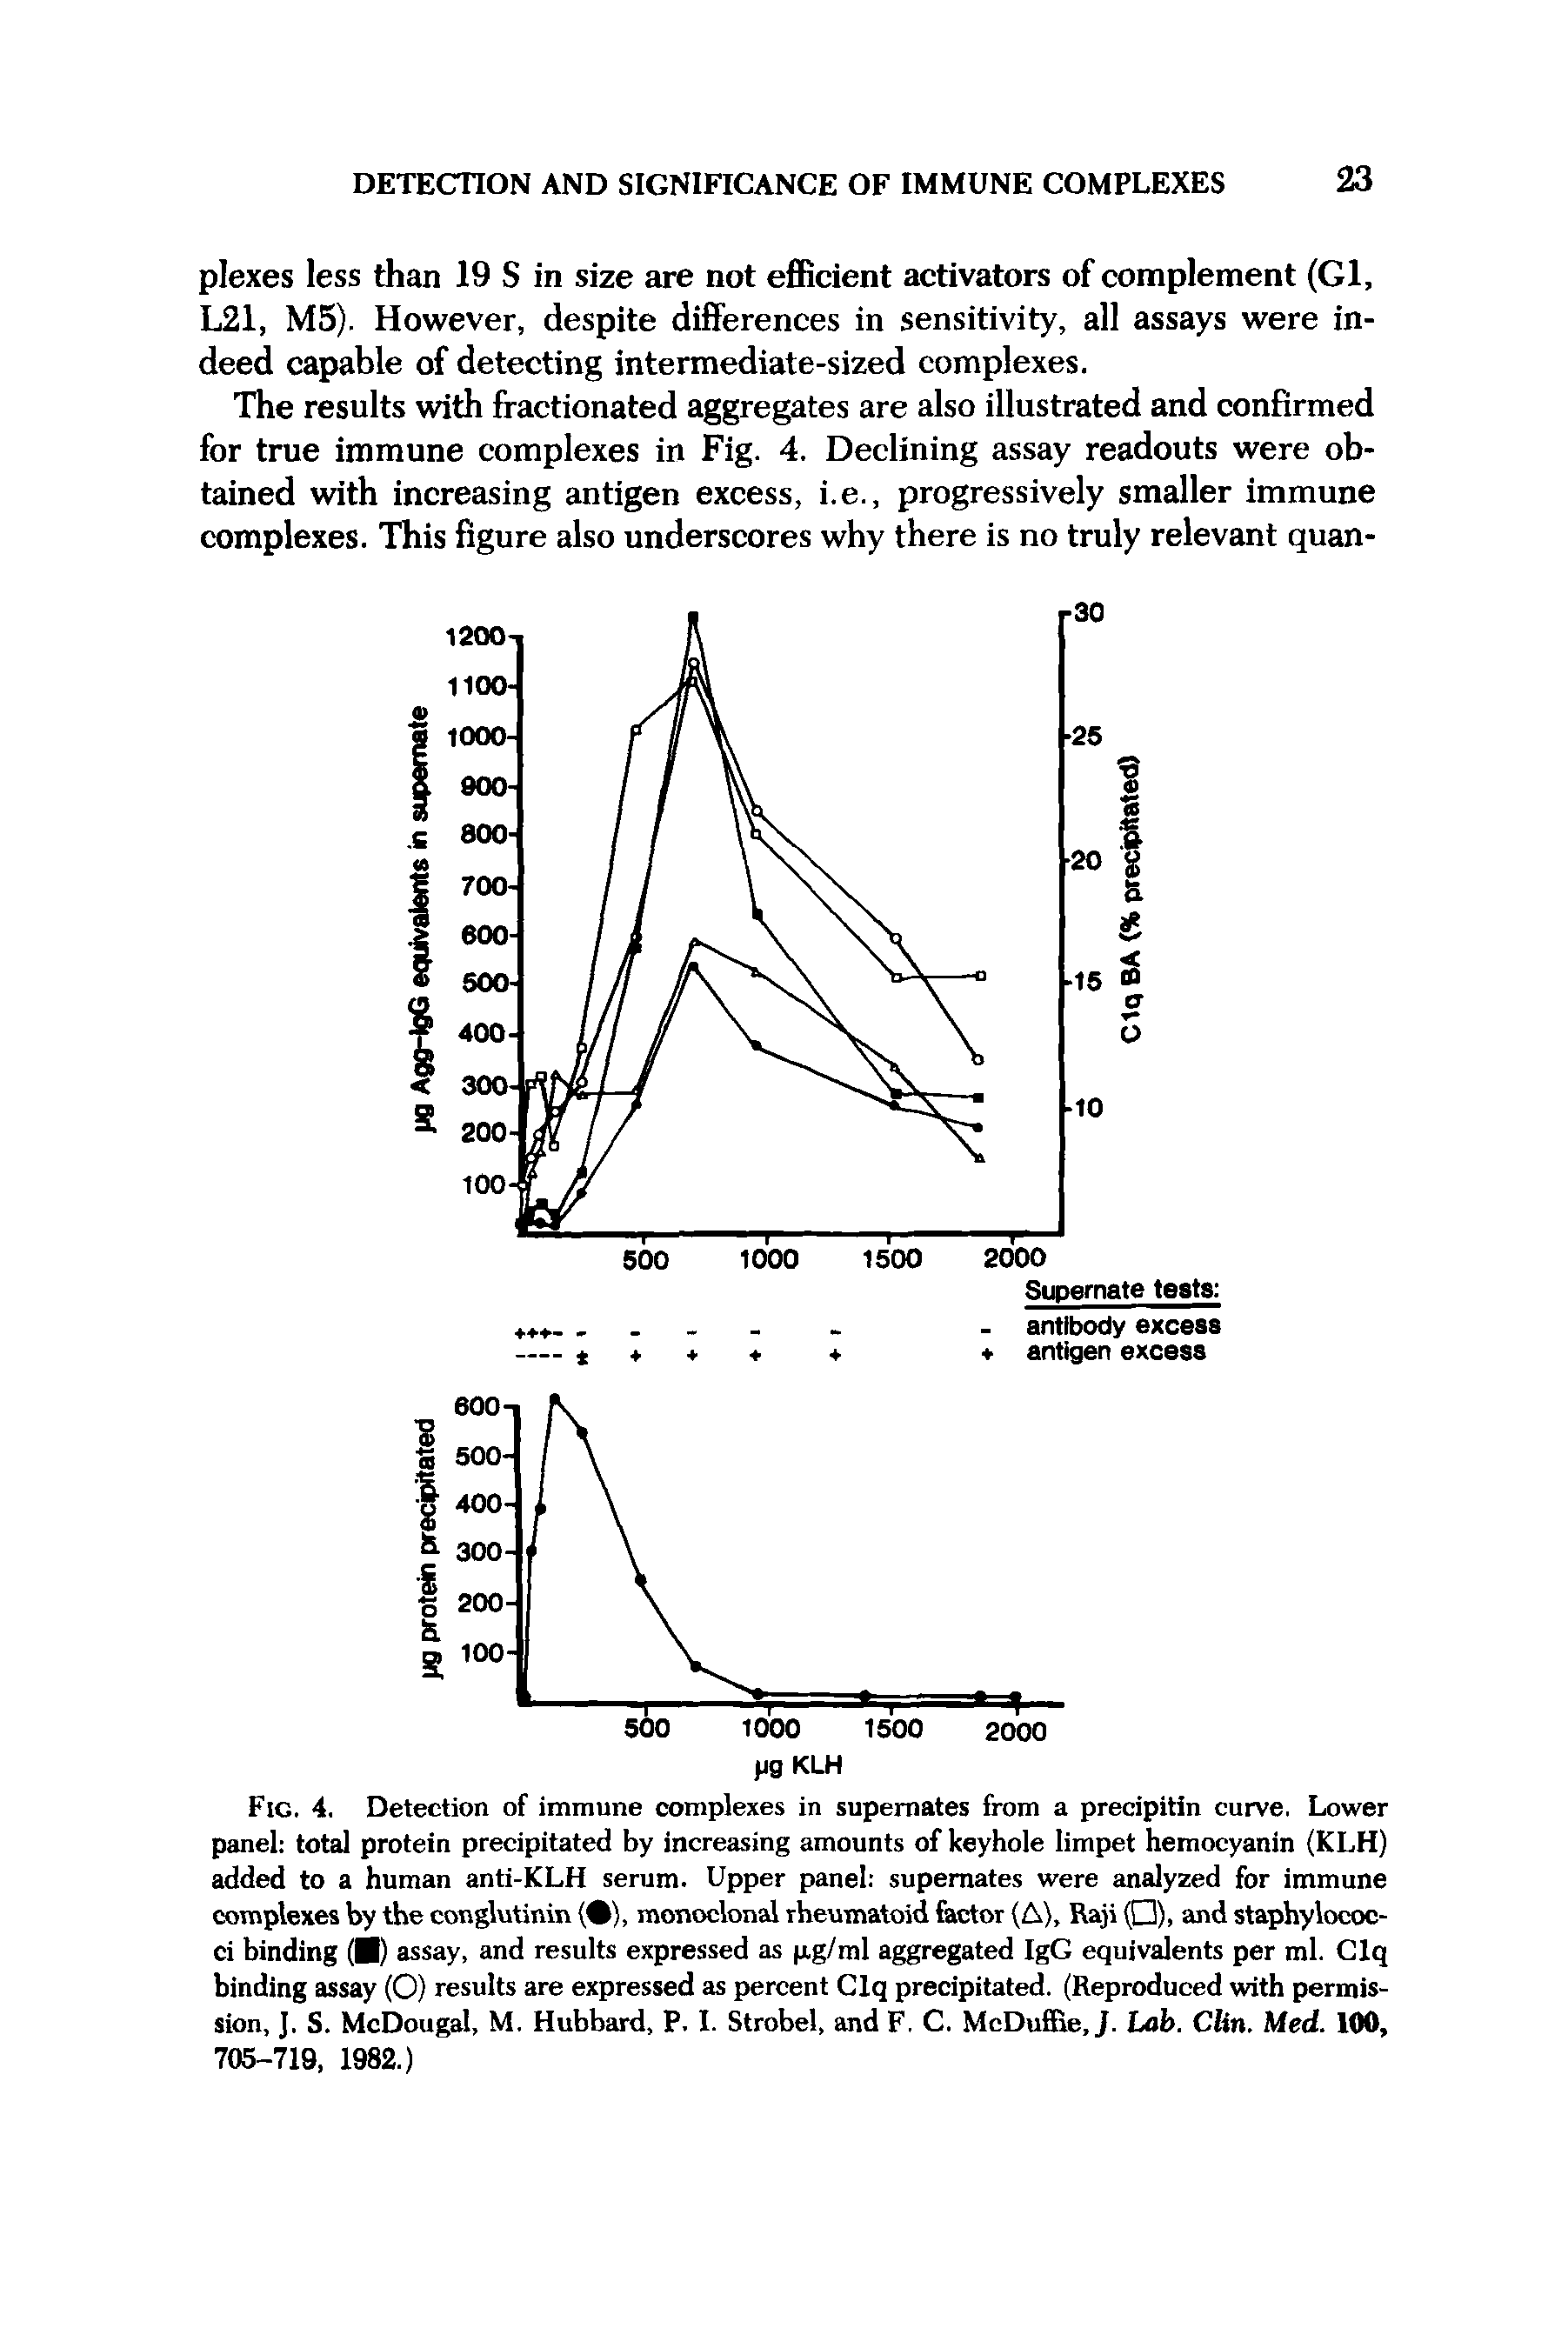 Fig. 4. Detection of immune complexes in supemates from a precipitin curve. Lower panel total protein precipitated by increasing amounts of keyhole limpet hemocyanin (KLH) added to a human anti-KLH serum. Upper panel supemates were analyzed for immune complexes by the conglutinin ( ), monoclonal rheumatoid factor (A), Raji ( ), and staphylococci binding (B) assay, and results expressed as pg/ml aggregated IgG equivalents per ml. Clq binding assay (O) results are expressed as percent Clq precipitated. (Reproduced with permission, J. S. McDougal, M. Hubbard, P. I. Strobel, and F. C. McDuffie, J. Lab. Clin. Med. 100, 705-719, 1982.)...